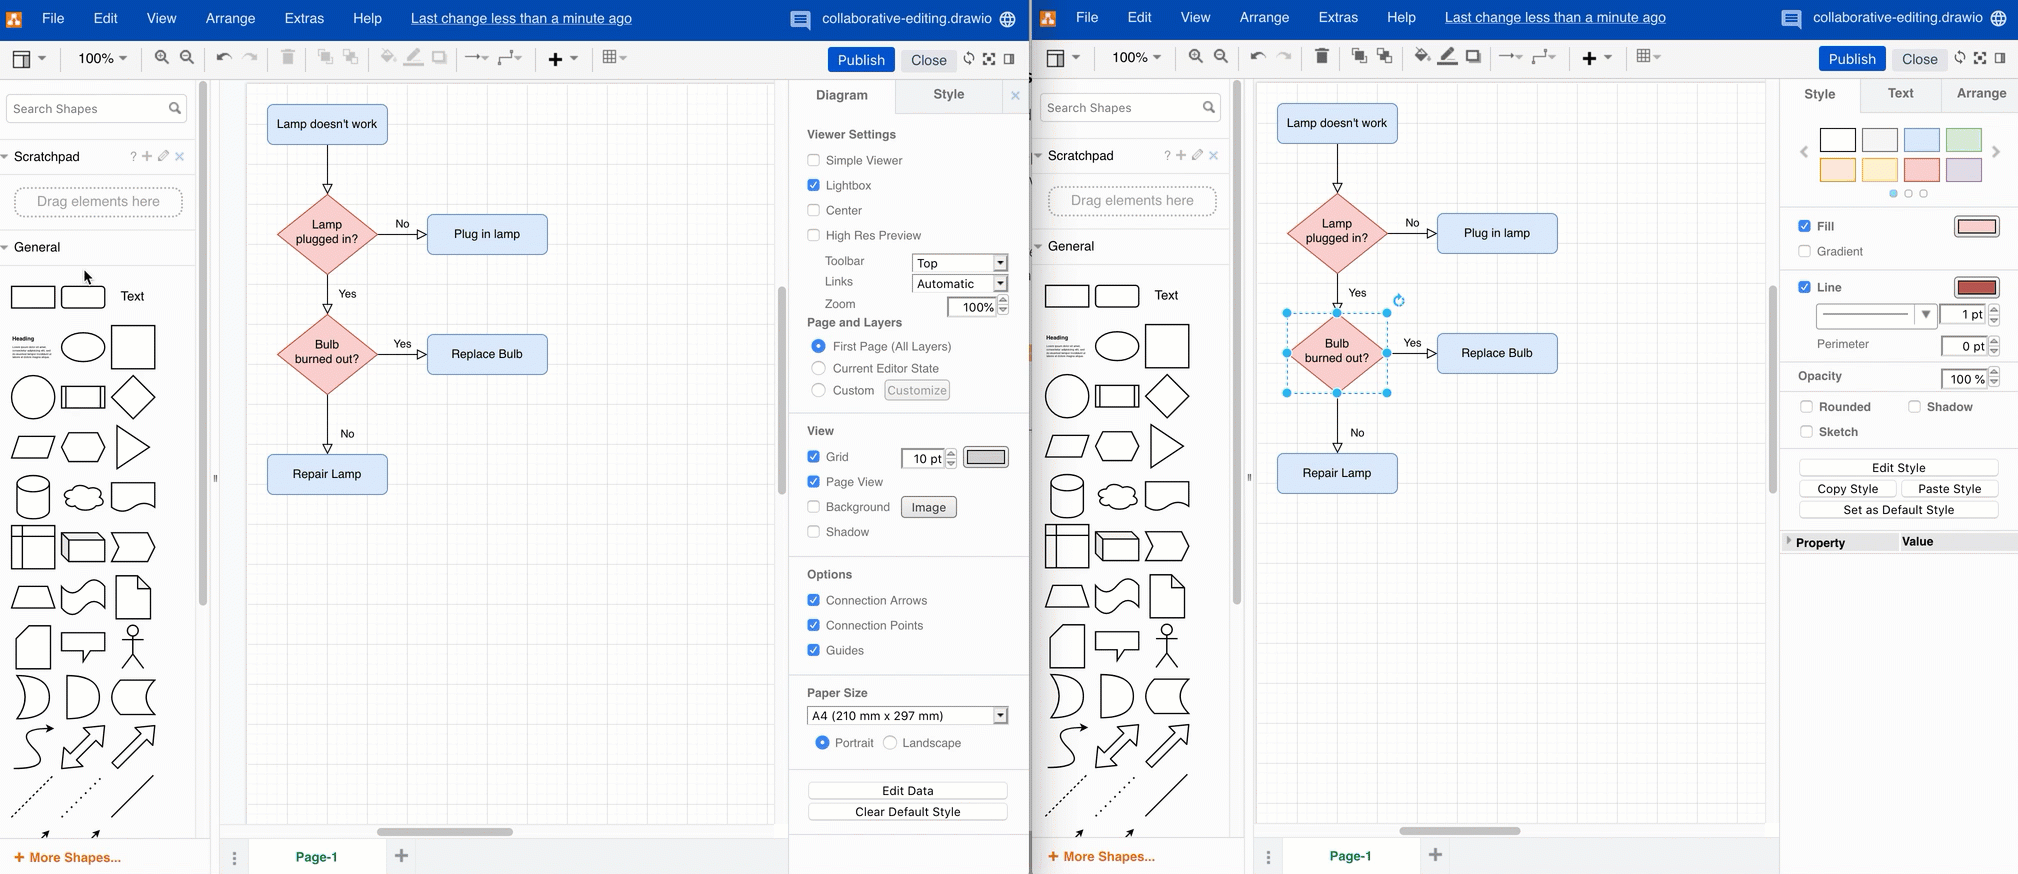 When multiple users add shapes in the same location, draw.io for Confluence Cloud will overlap them